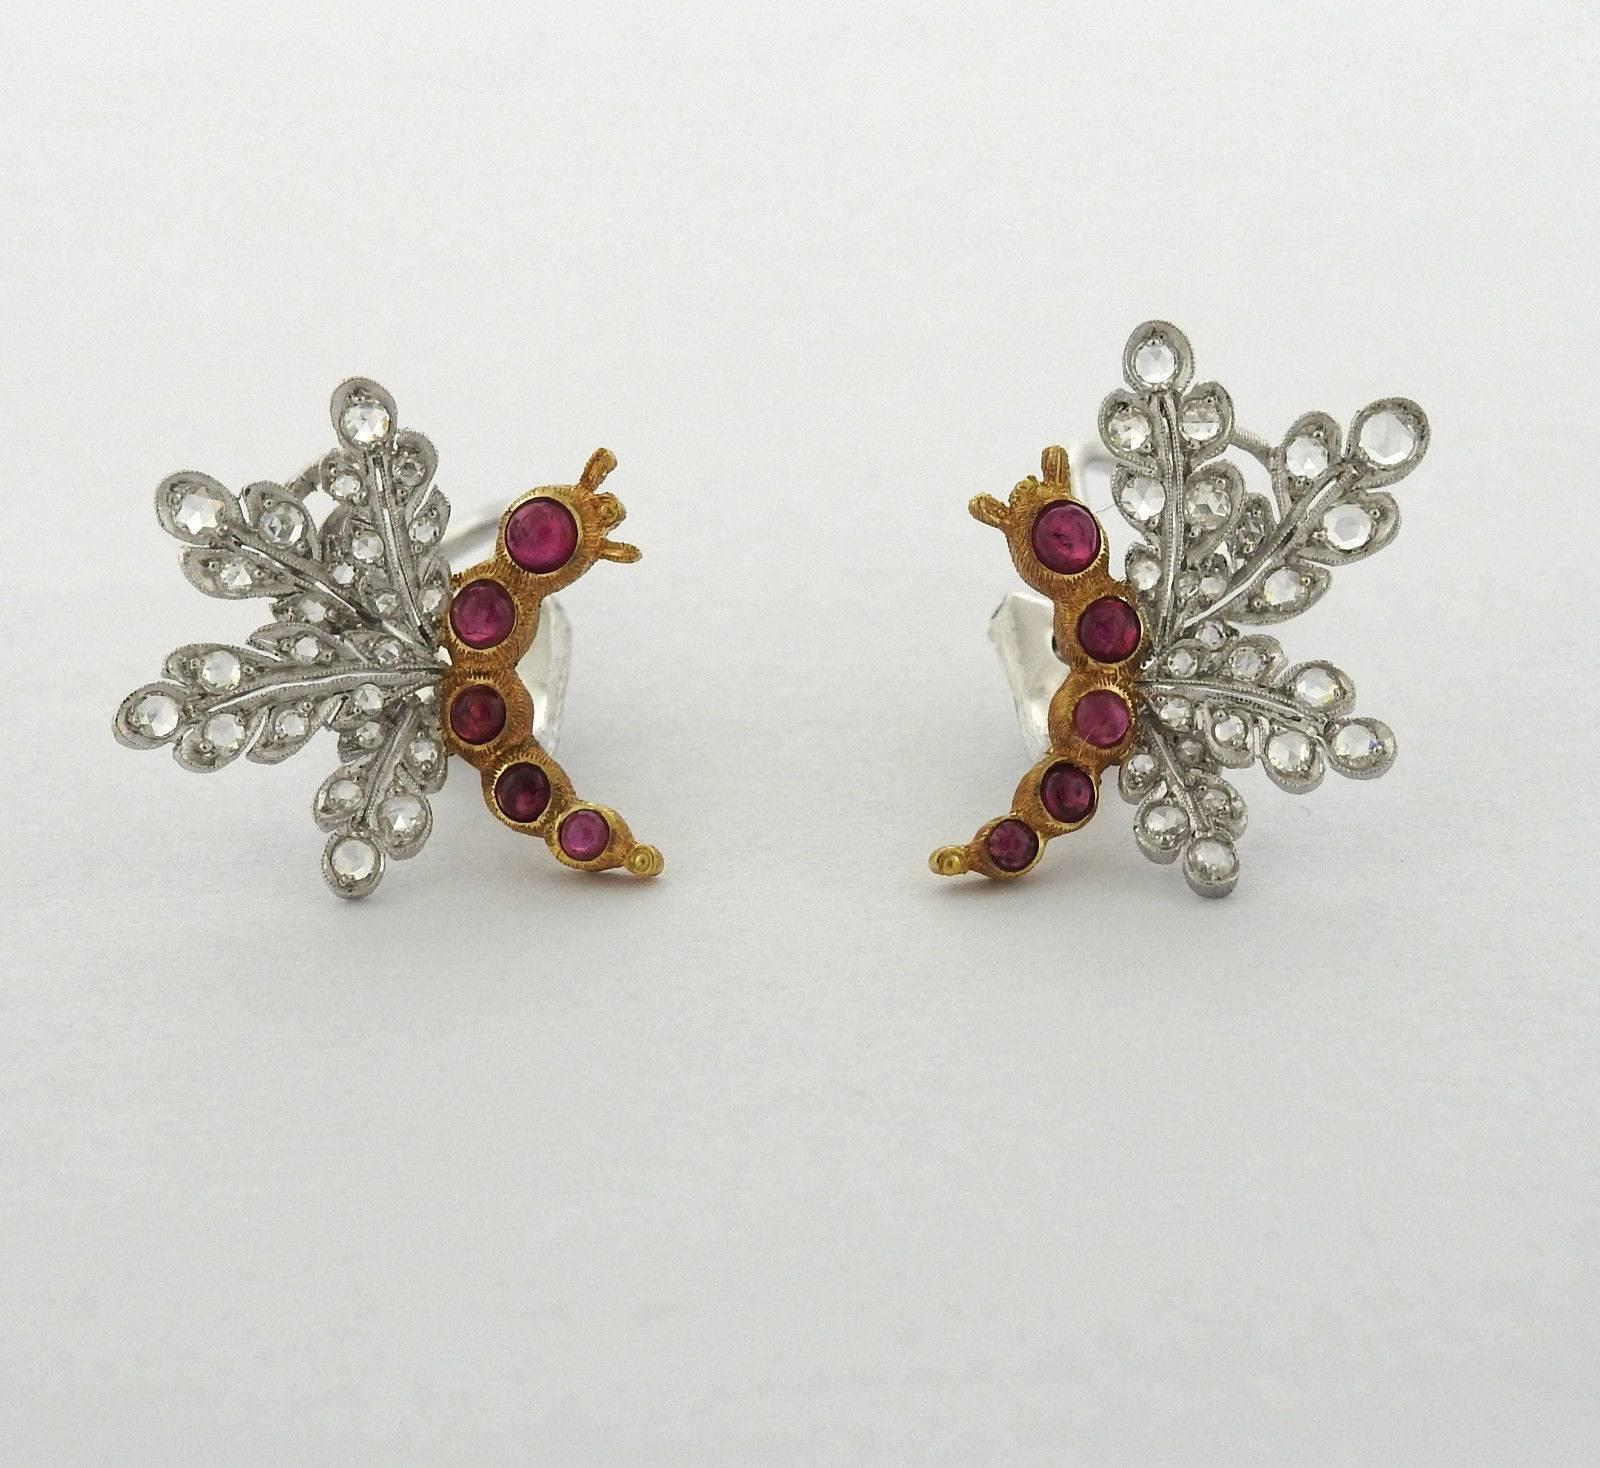 Buccellati Ruby Rose Cut Diamond Gold Earrings In Excellent Condition For Sale In Lambertville, NJ